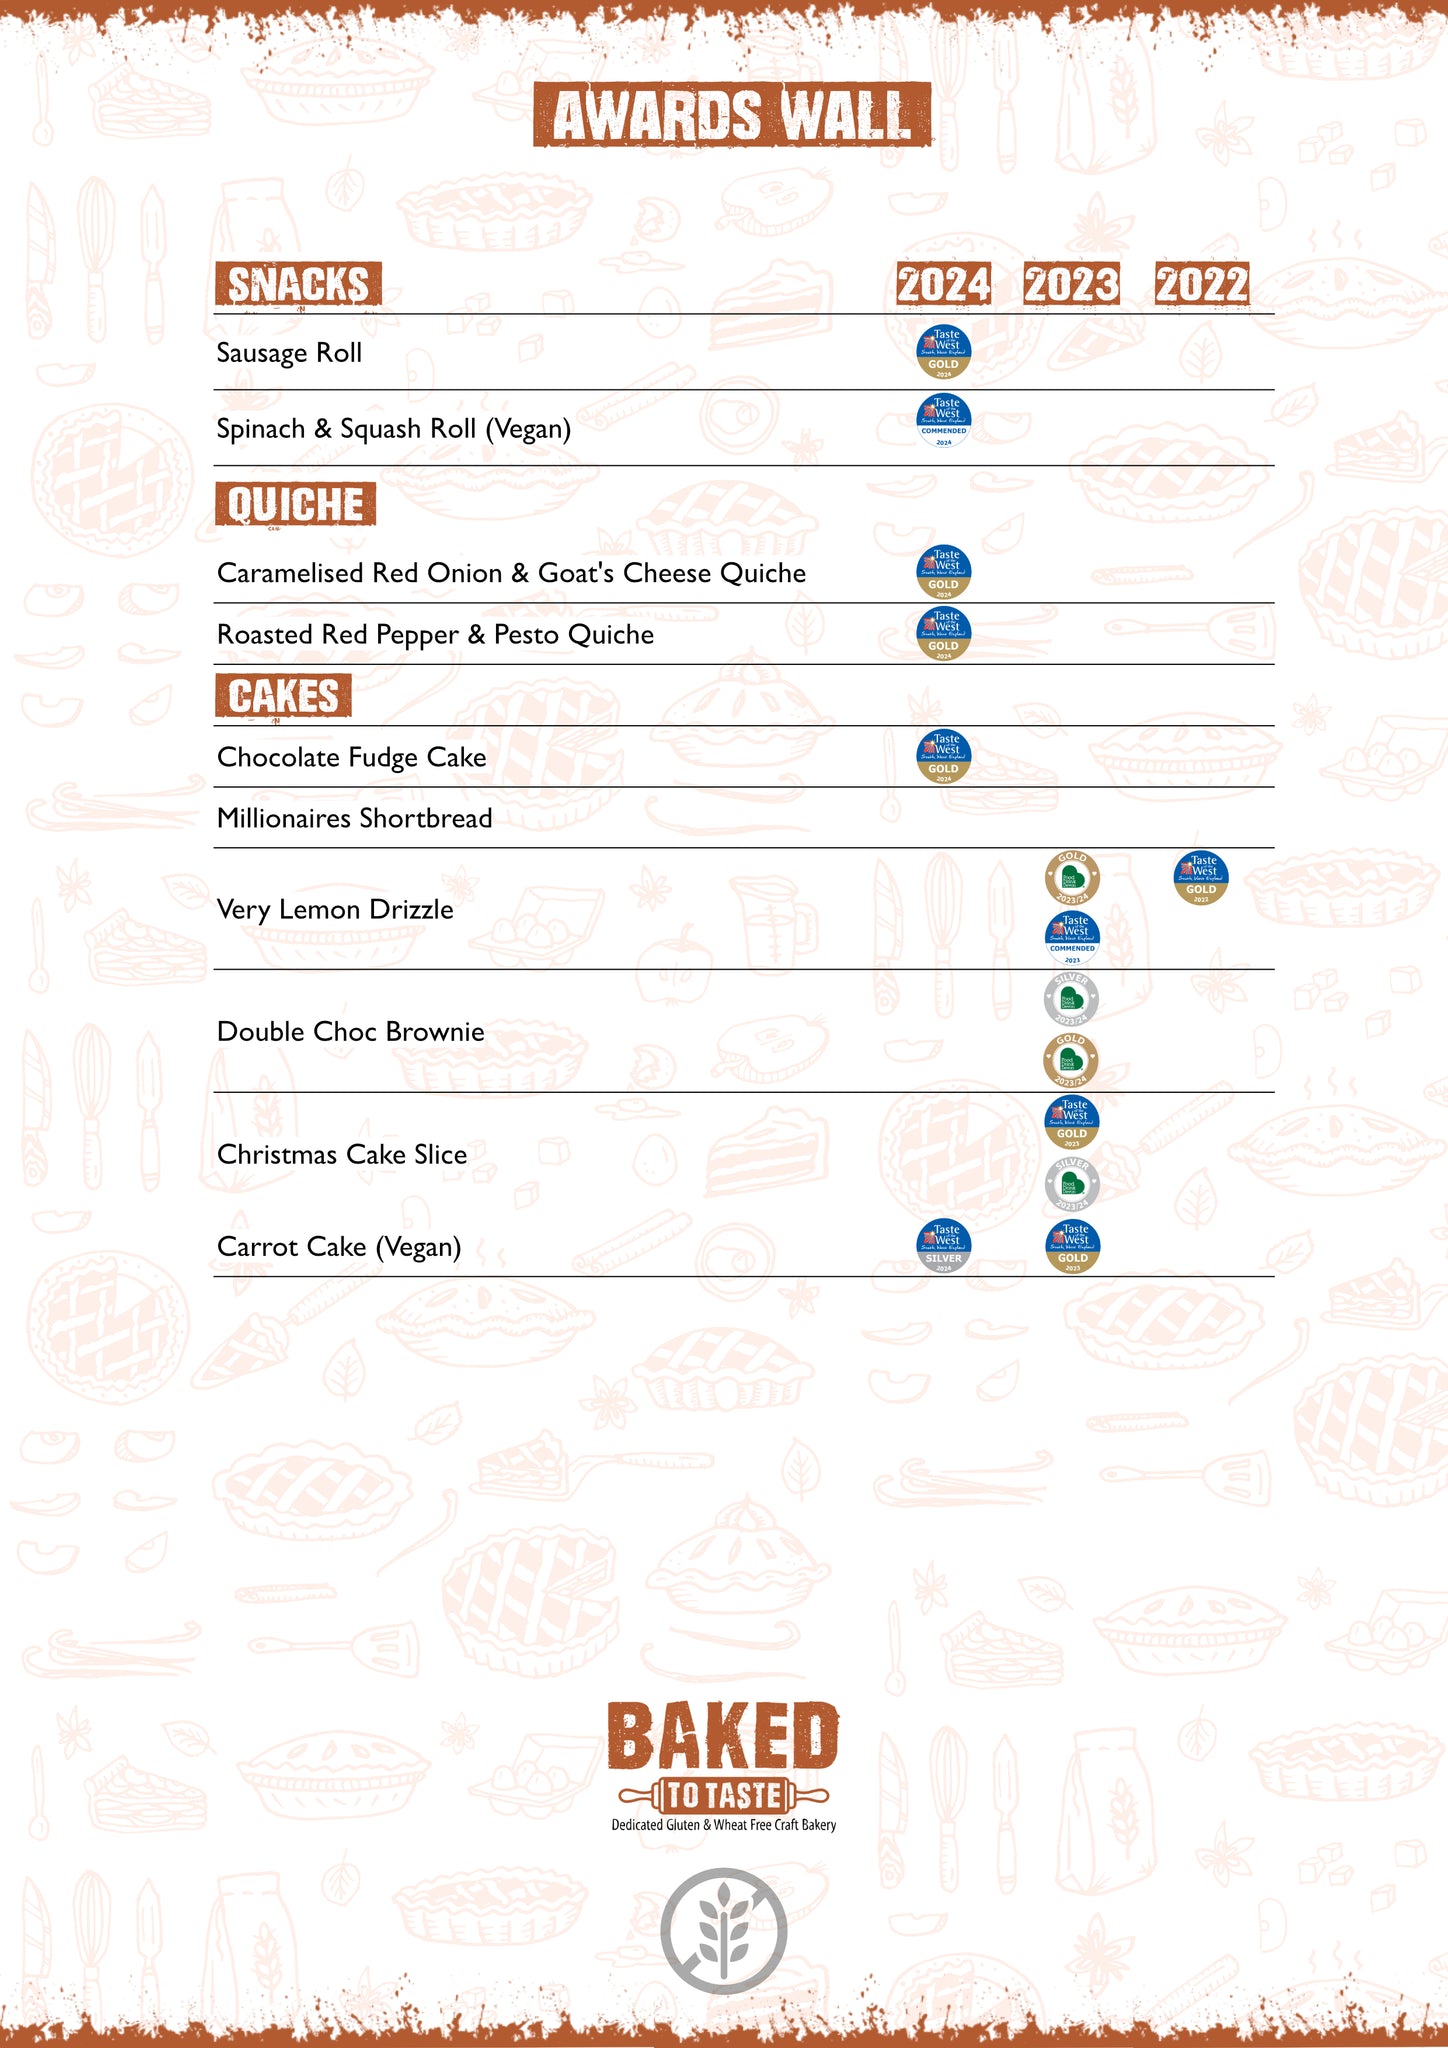 Baked to Taste Awards Wall page 2